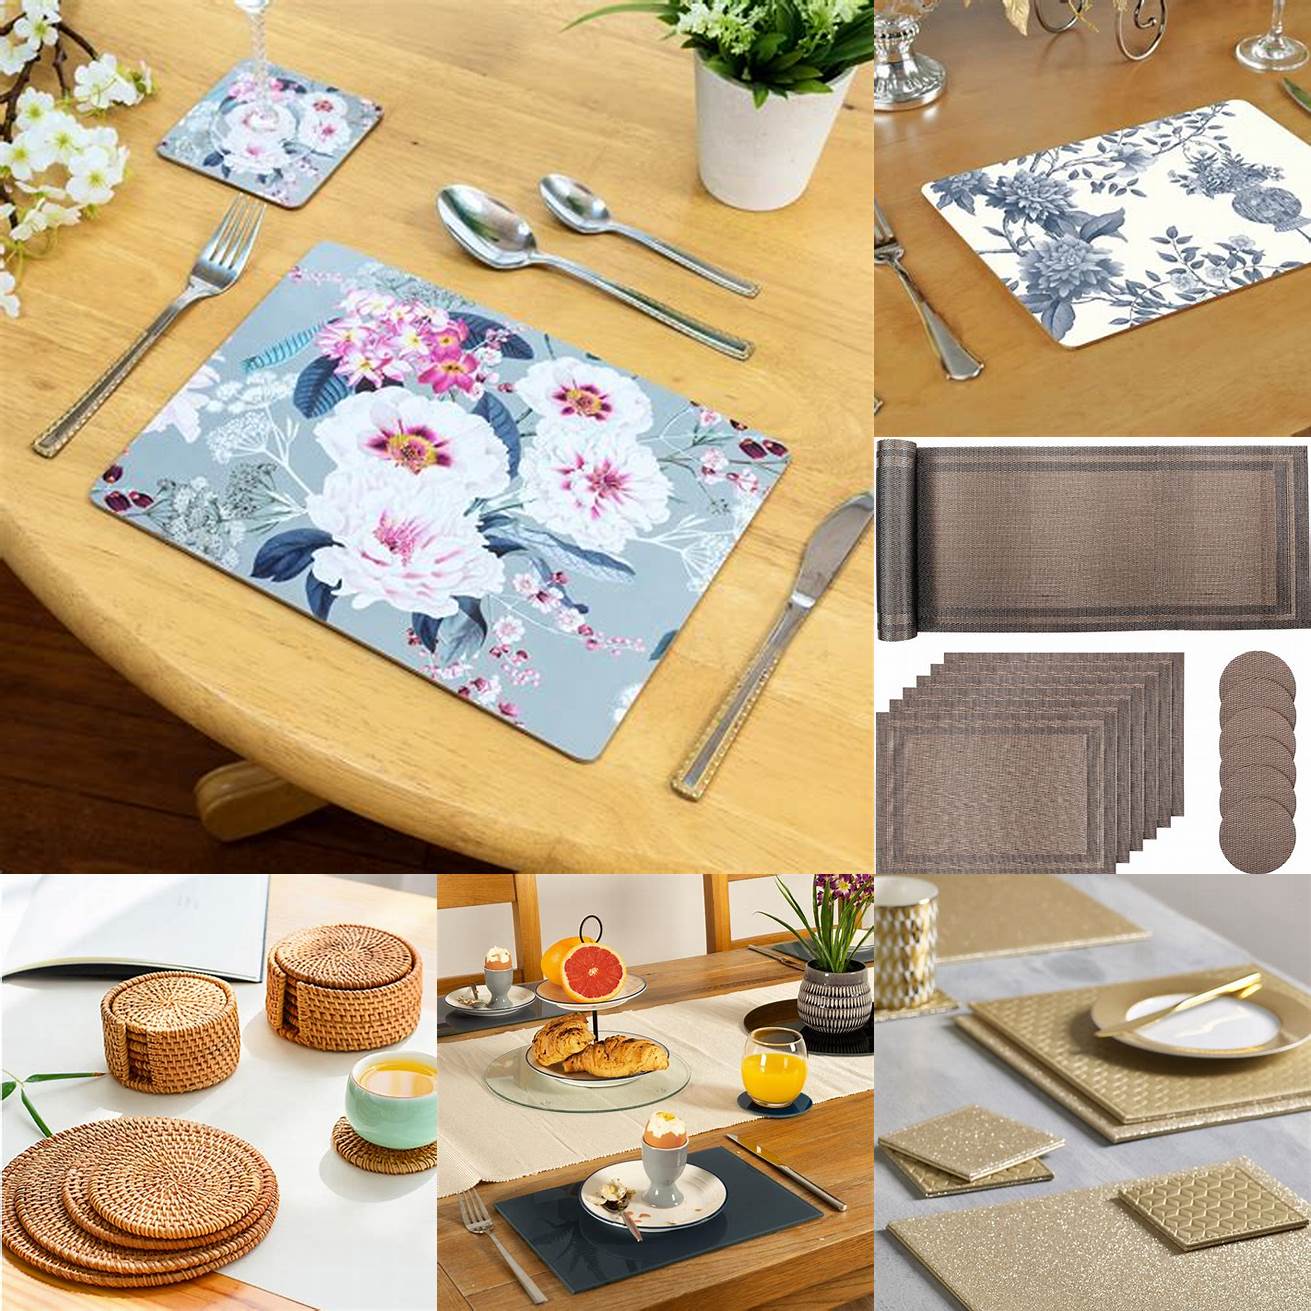 Use Coasters and Placemats